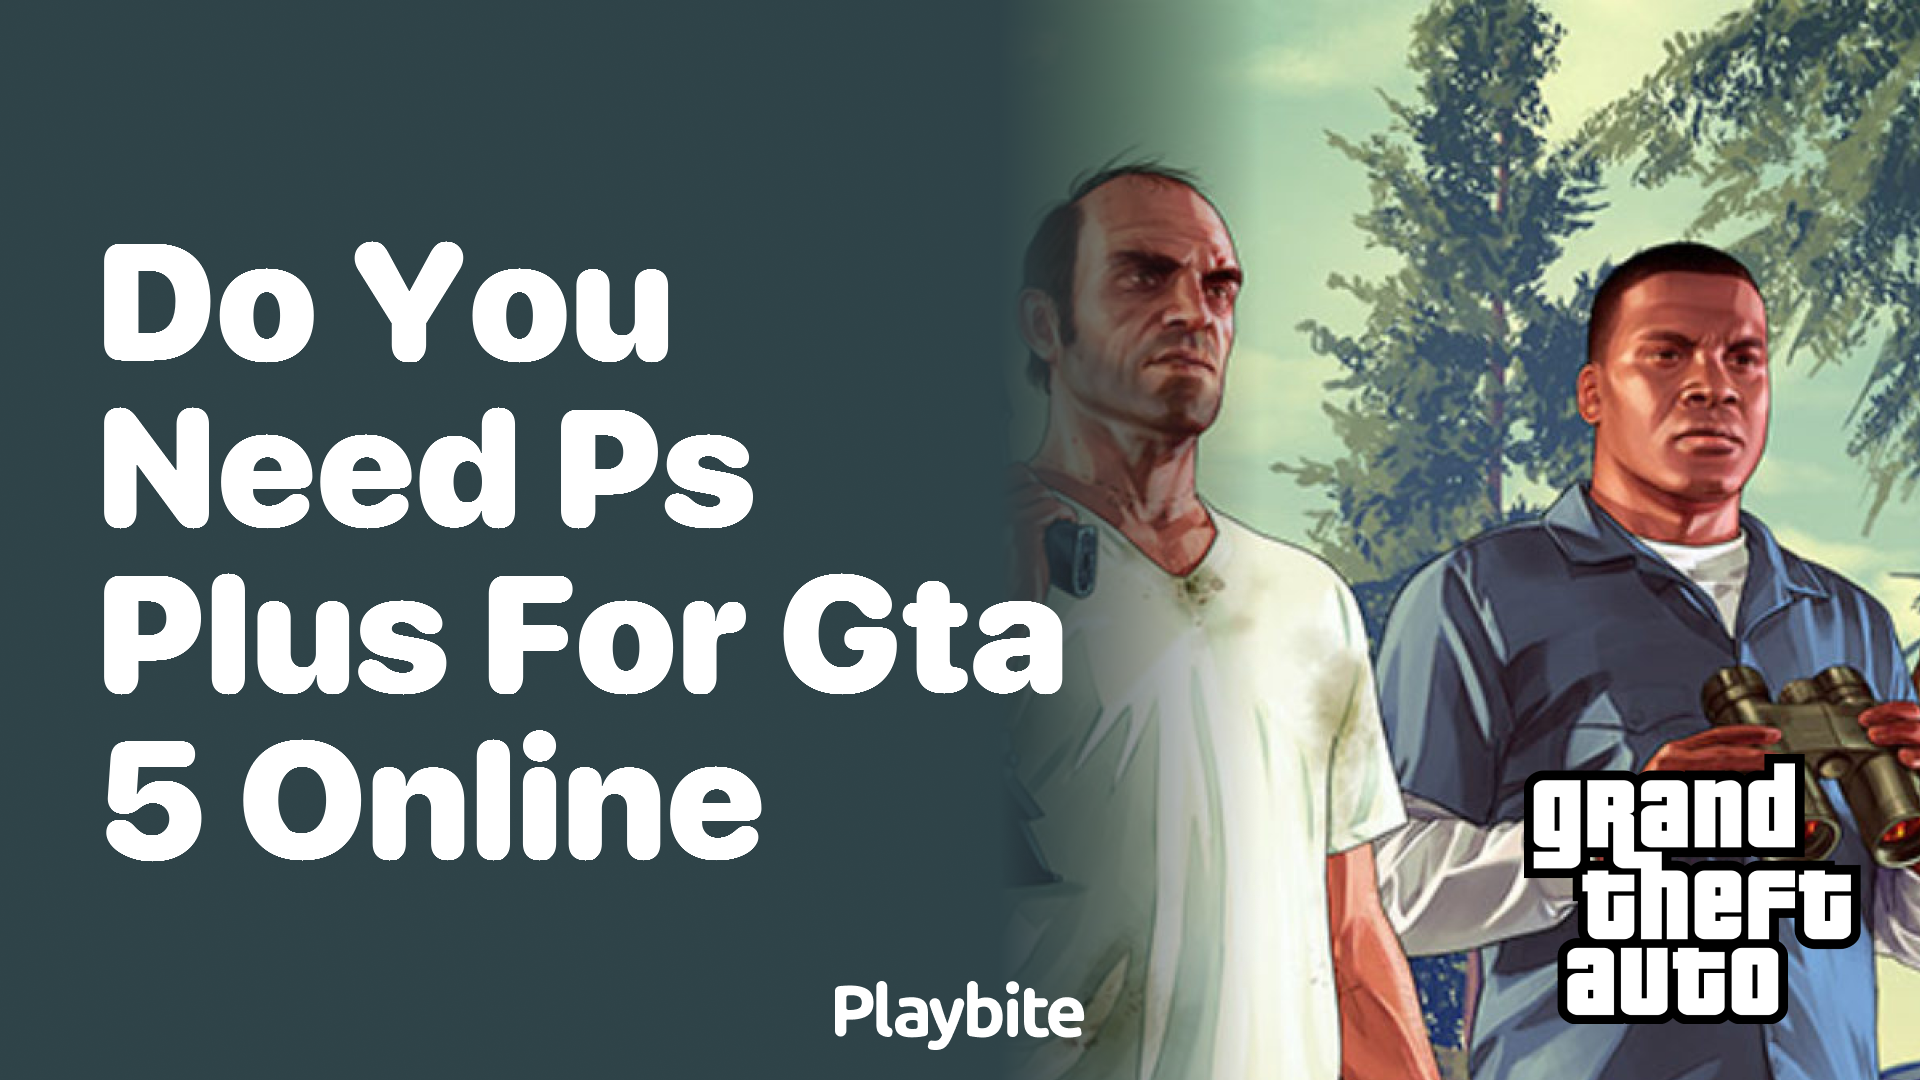 Do you need PS Plus to play GTA 5 online?